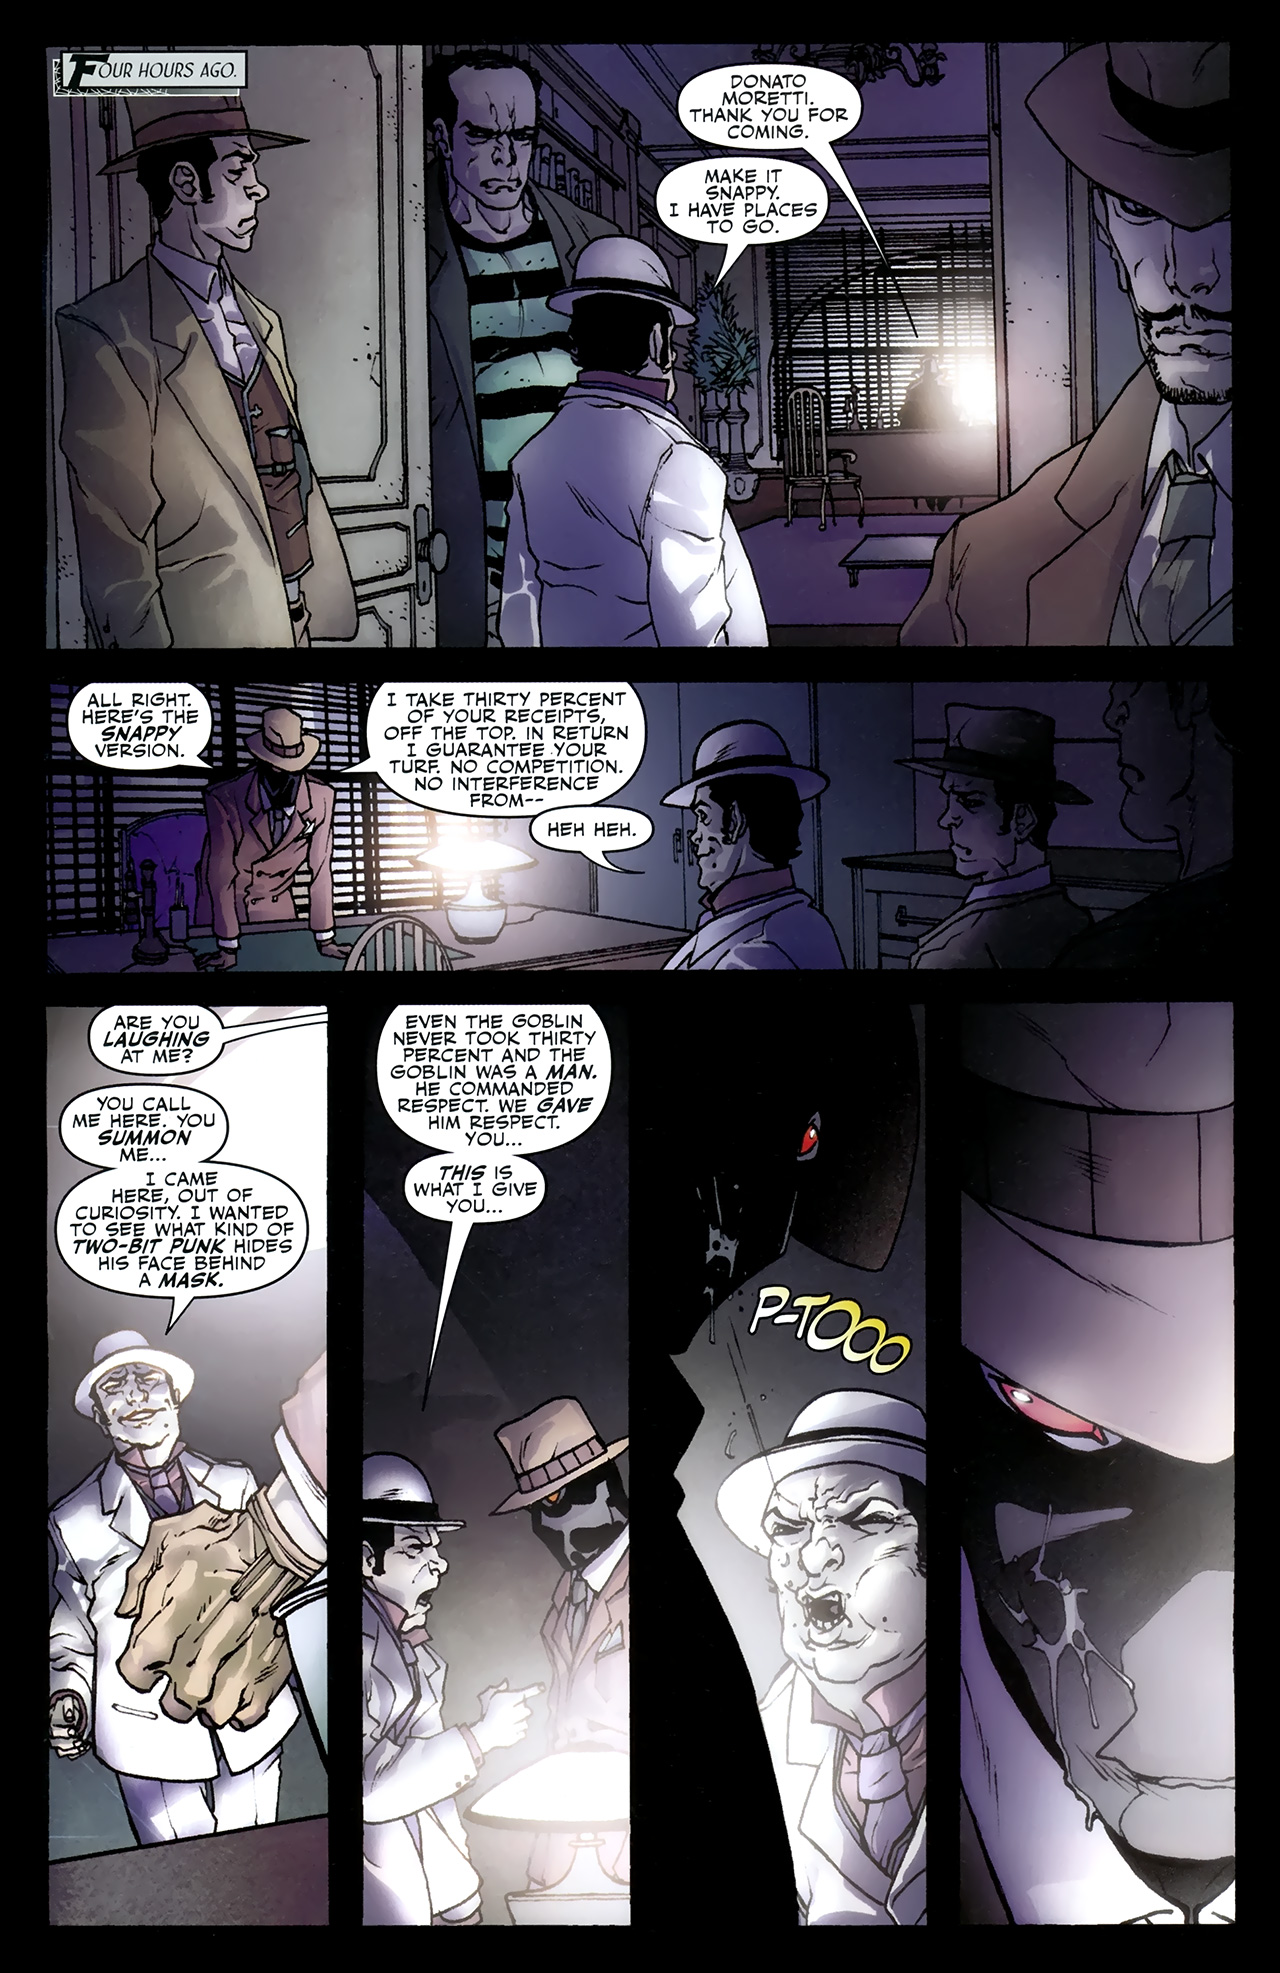 Spider-Man Noir - Eyes Without A Face #1 (of 4) 